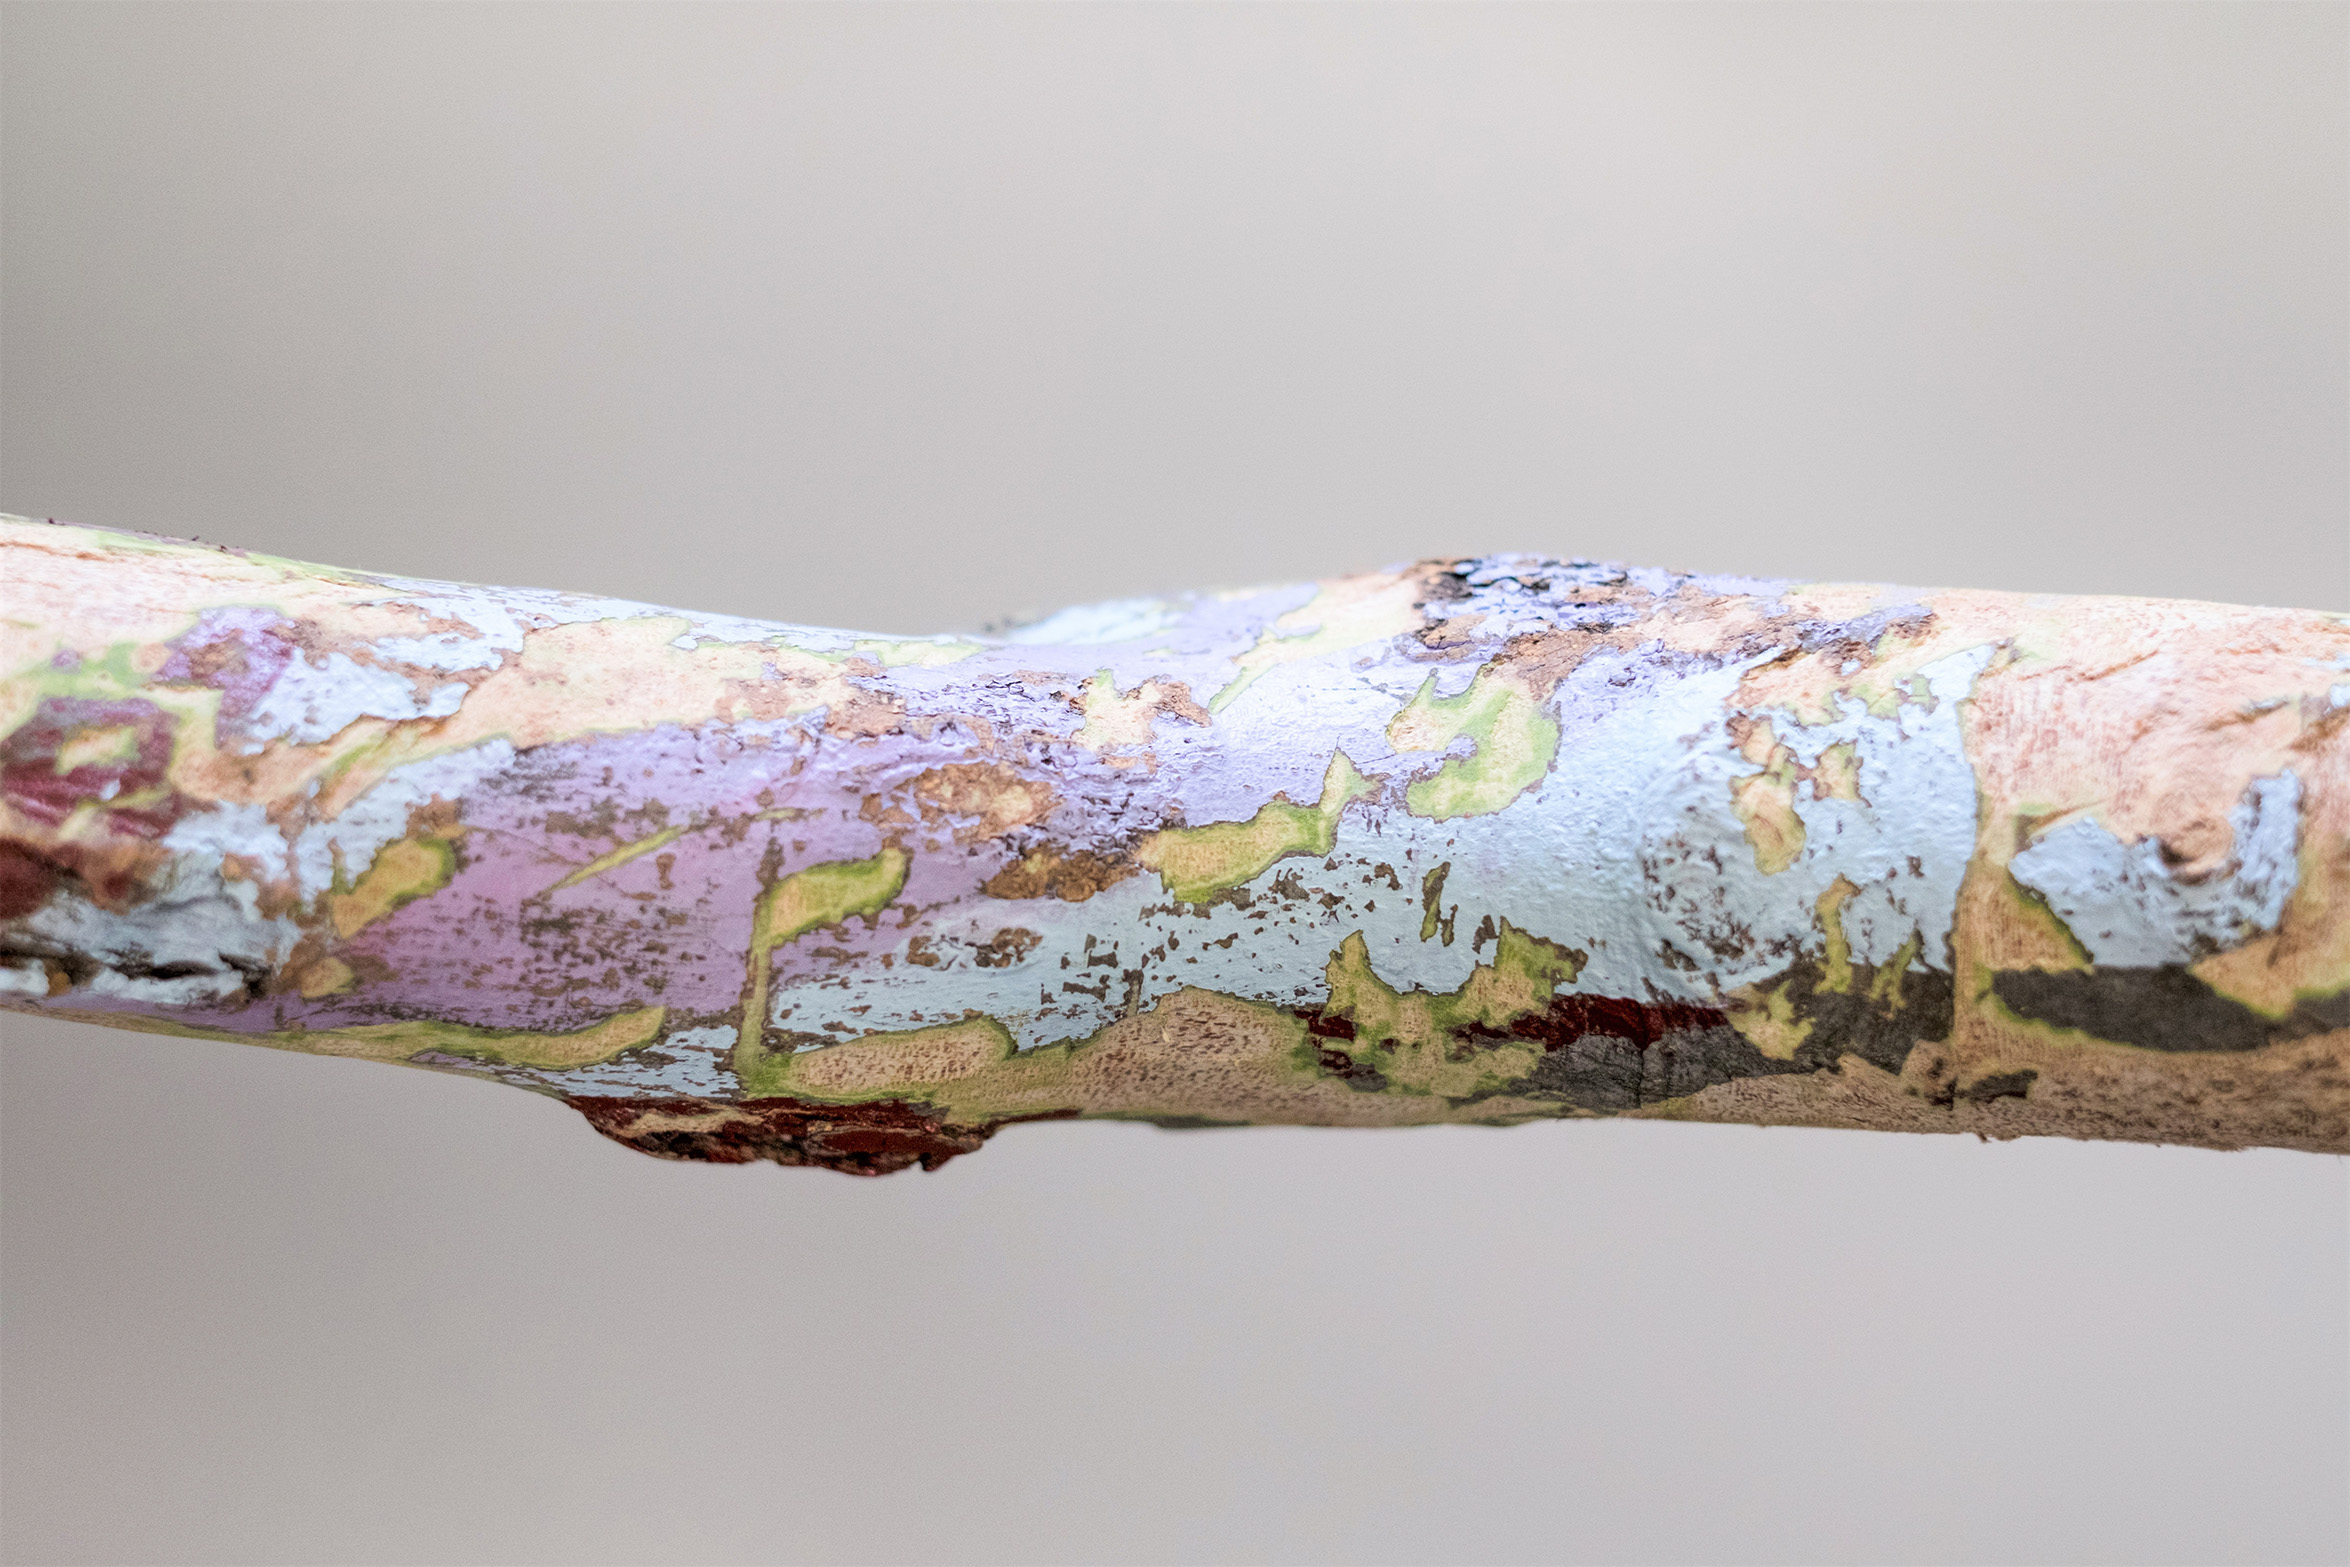  New Skin   acrylic on wood branches   dimensions variable  2015 